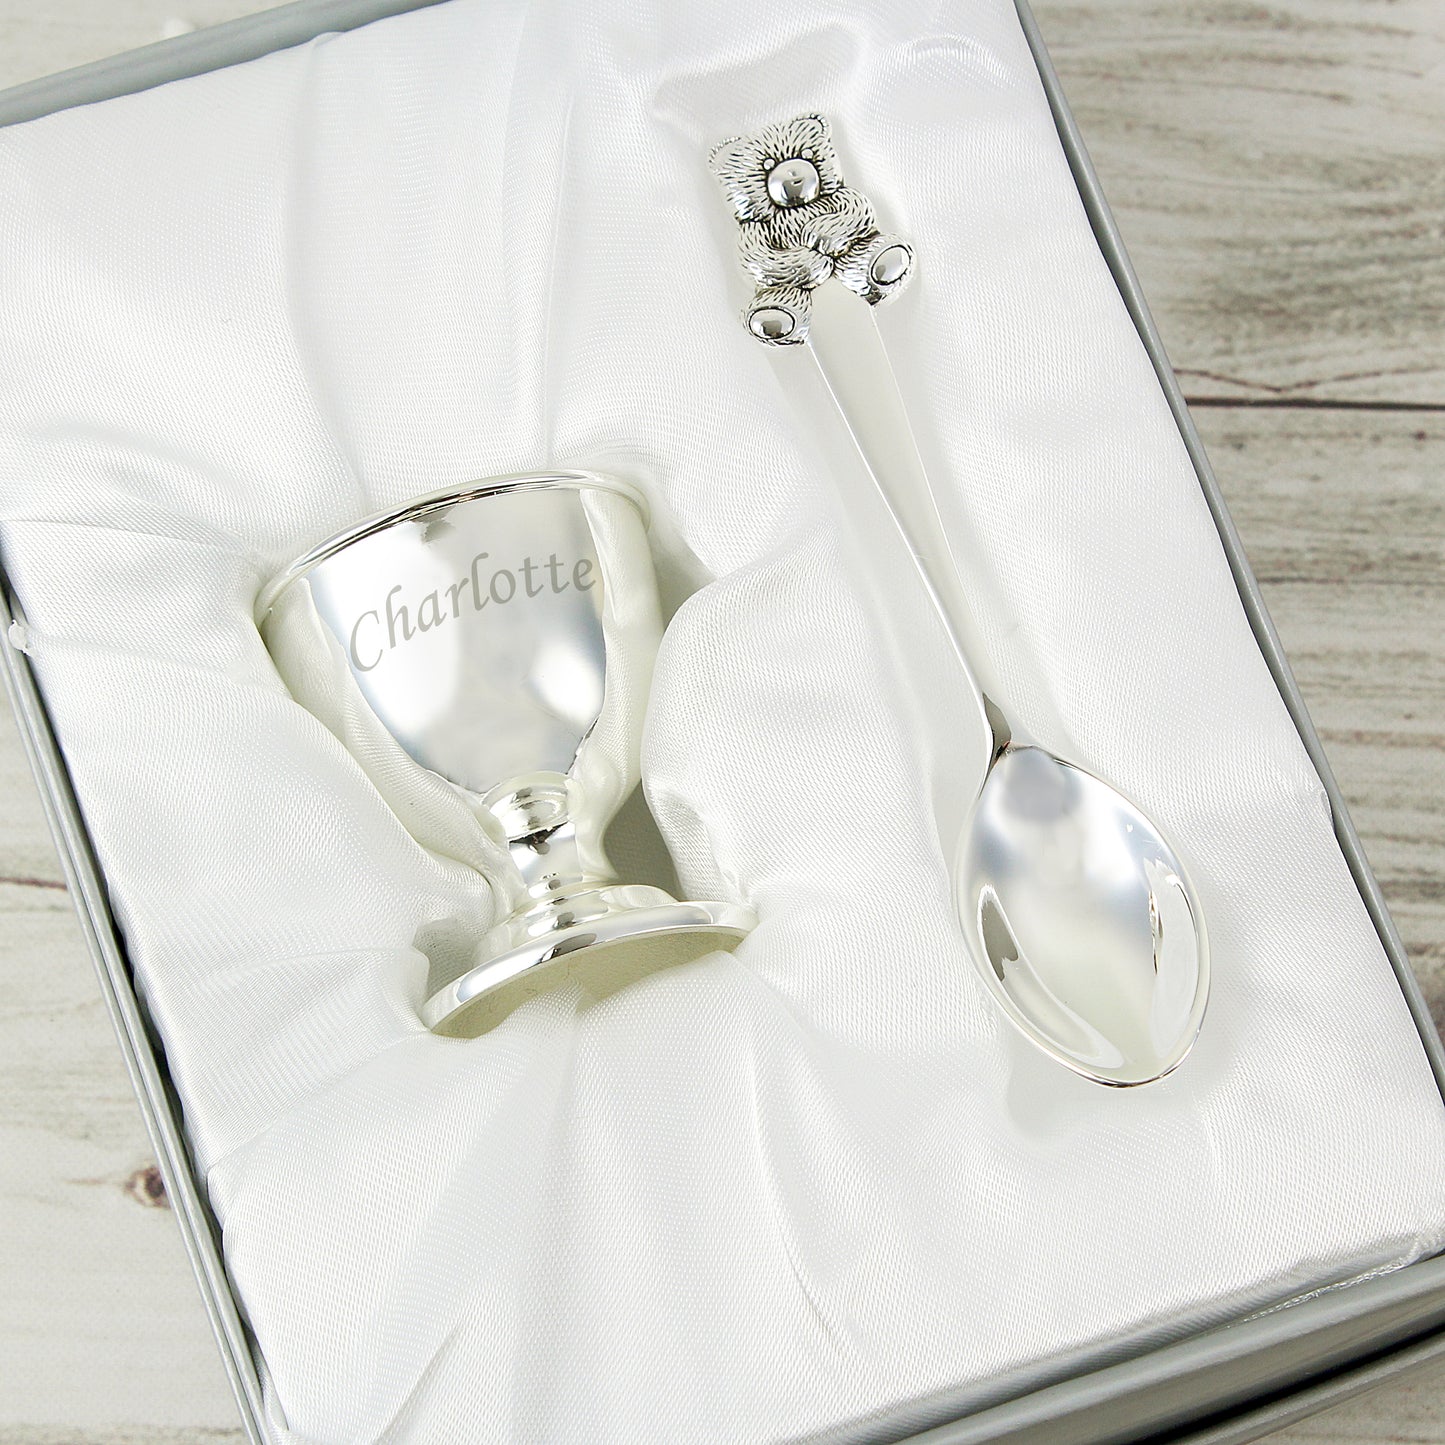 Personalised Silver Egg Cup & Spoon - Personalise It!